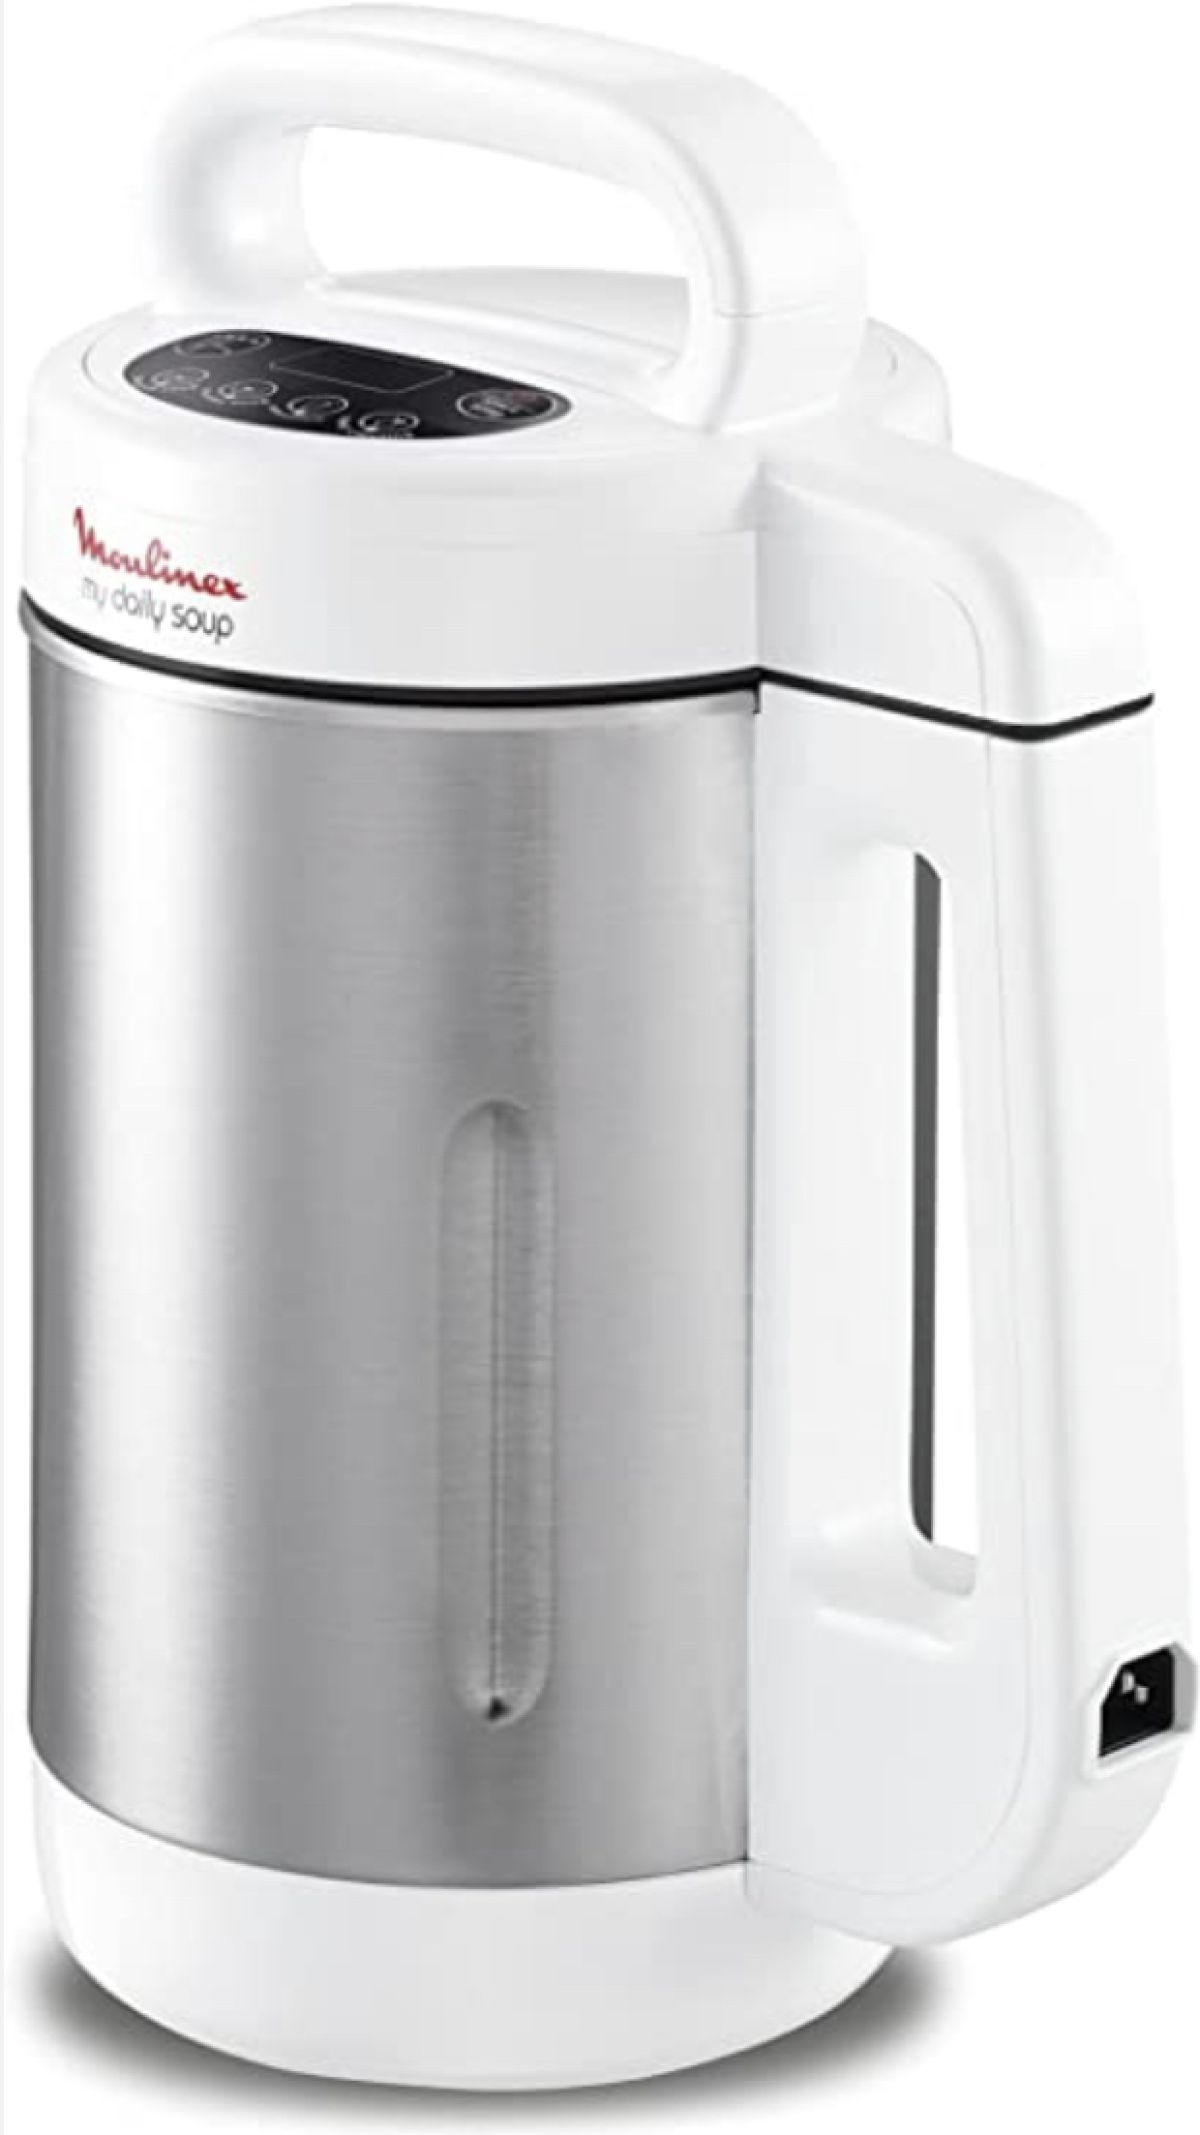 Moulinex My daily soup Blender Chauffant